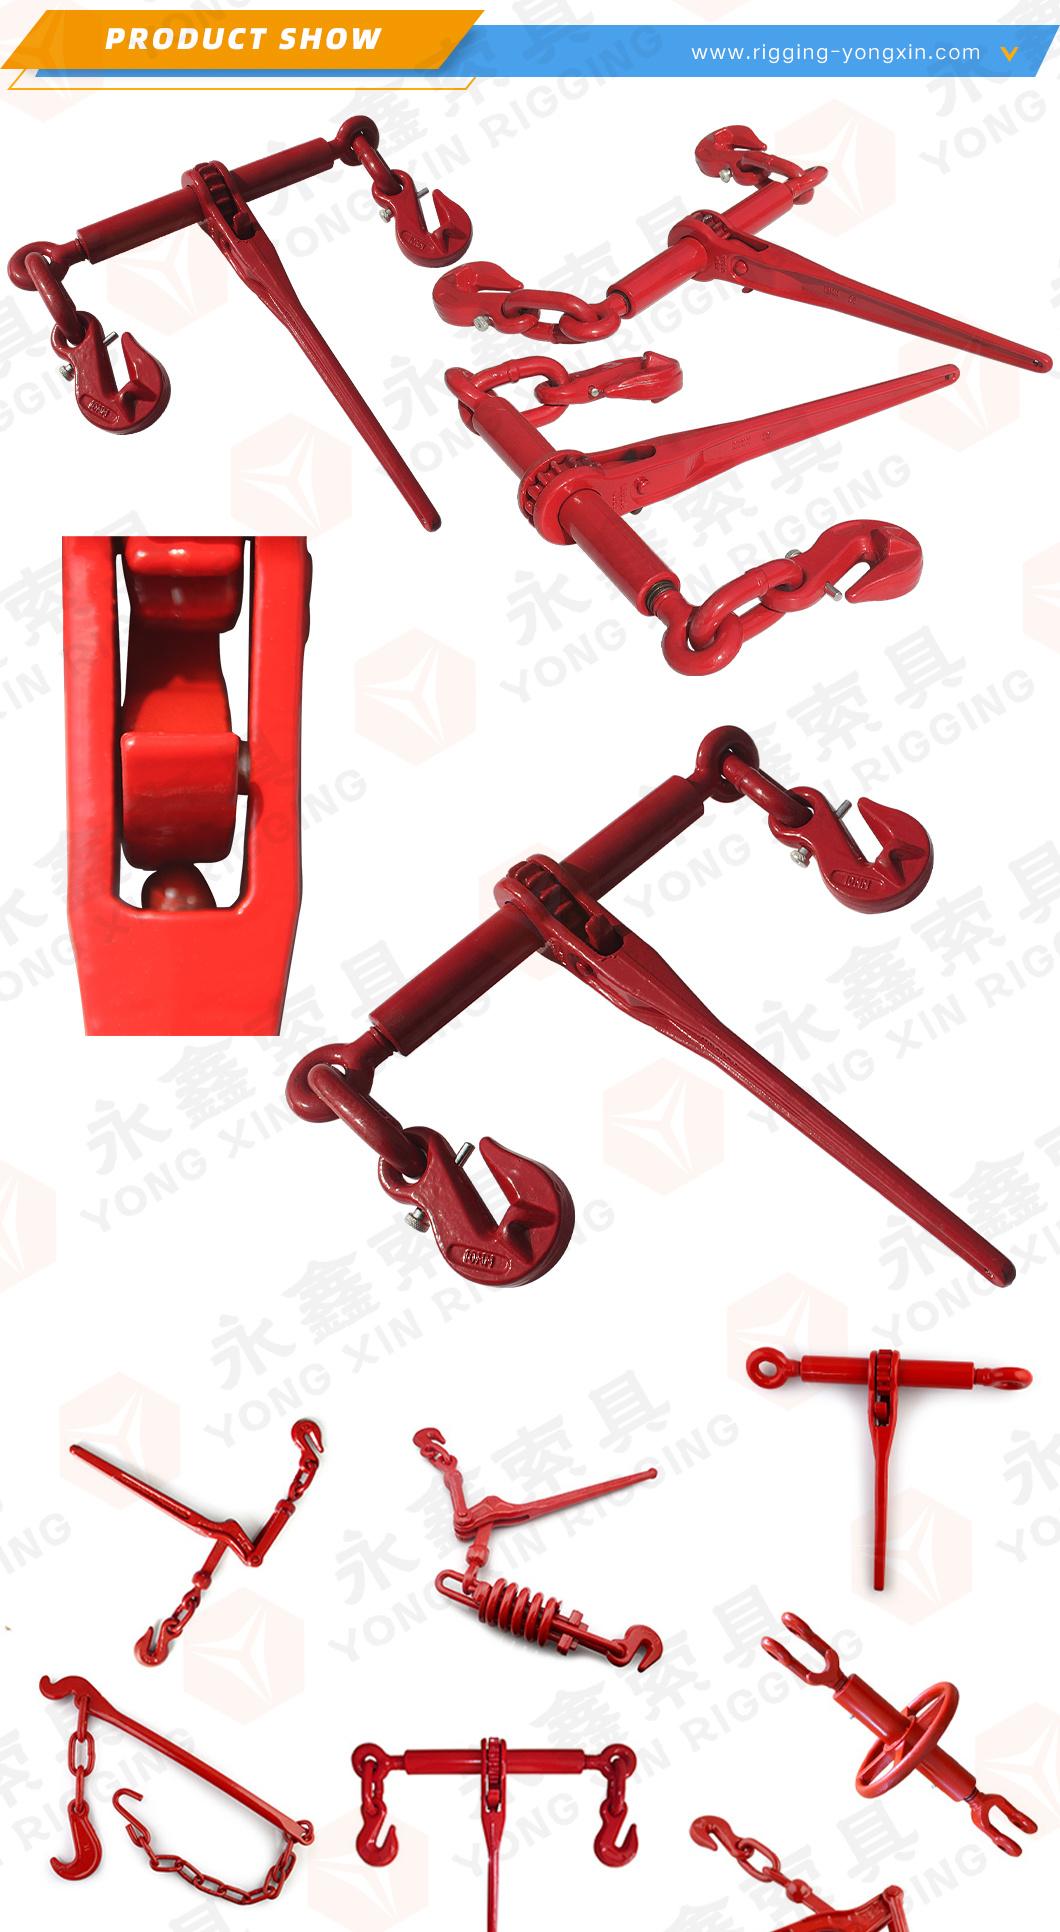 G70 Foldable Ratchet Load Binder Us European with Two Clevis Grab Hook